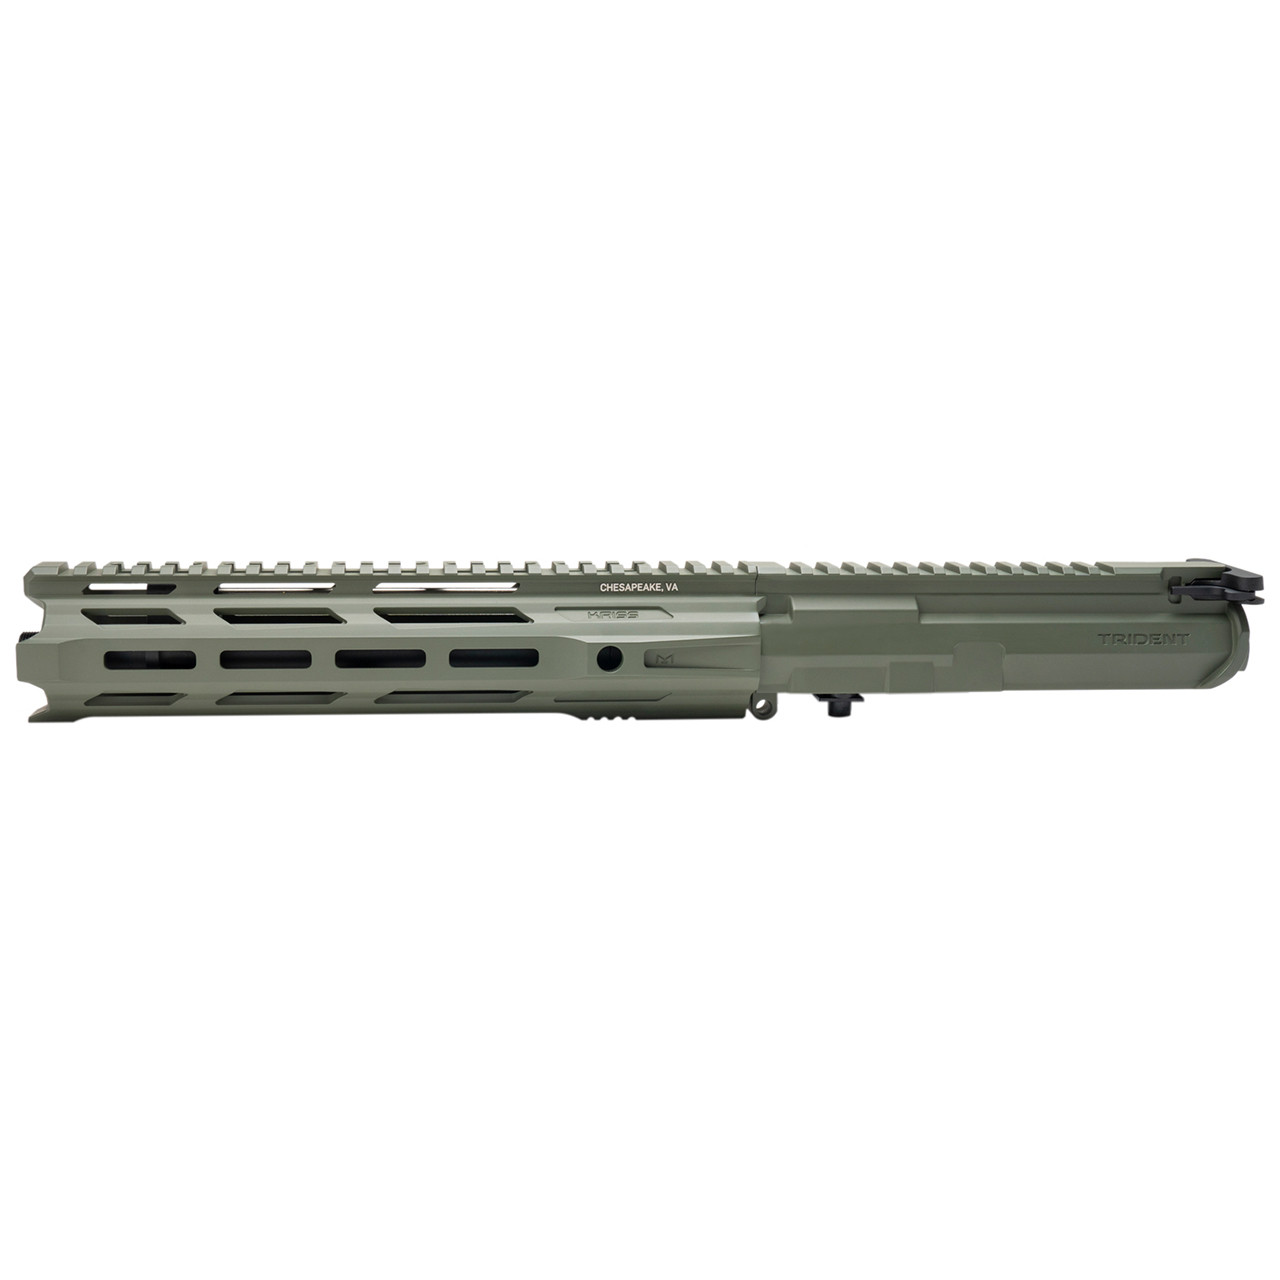 Shop Trident MK2 CRB-M Complete Upper Assembly / FG - $ 230 - Krytac.com | For Airsoft Use Only.